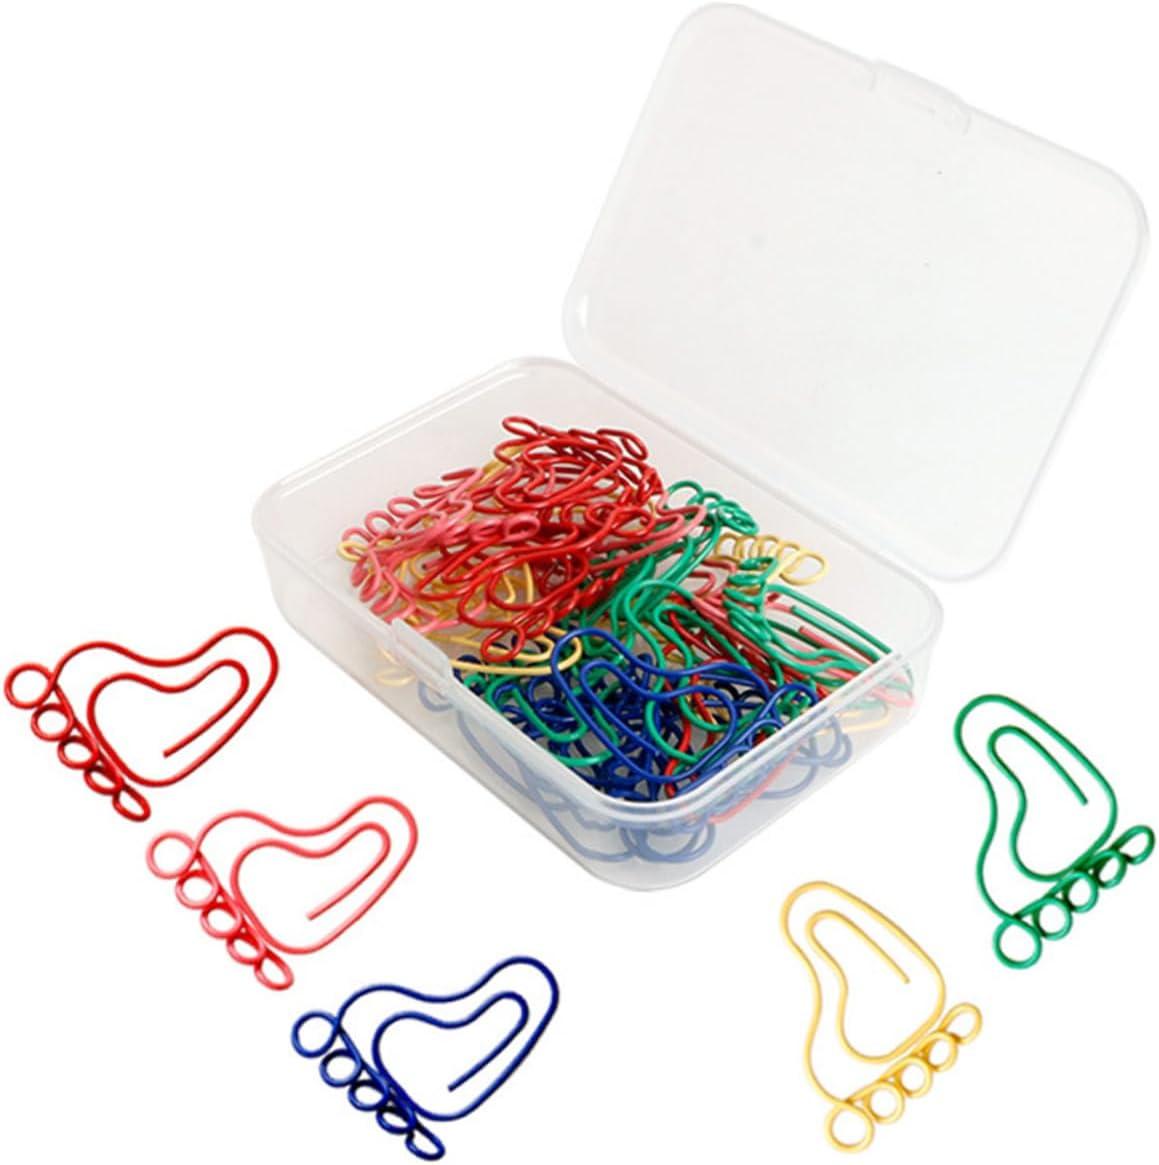 OHPHCALL Paperclips Large 30pcs Little Feet Paper Clip Coated Paper Clips Colored Paper Clips Binder Paper Clips Foot Shaped Metal Marking Clips